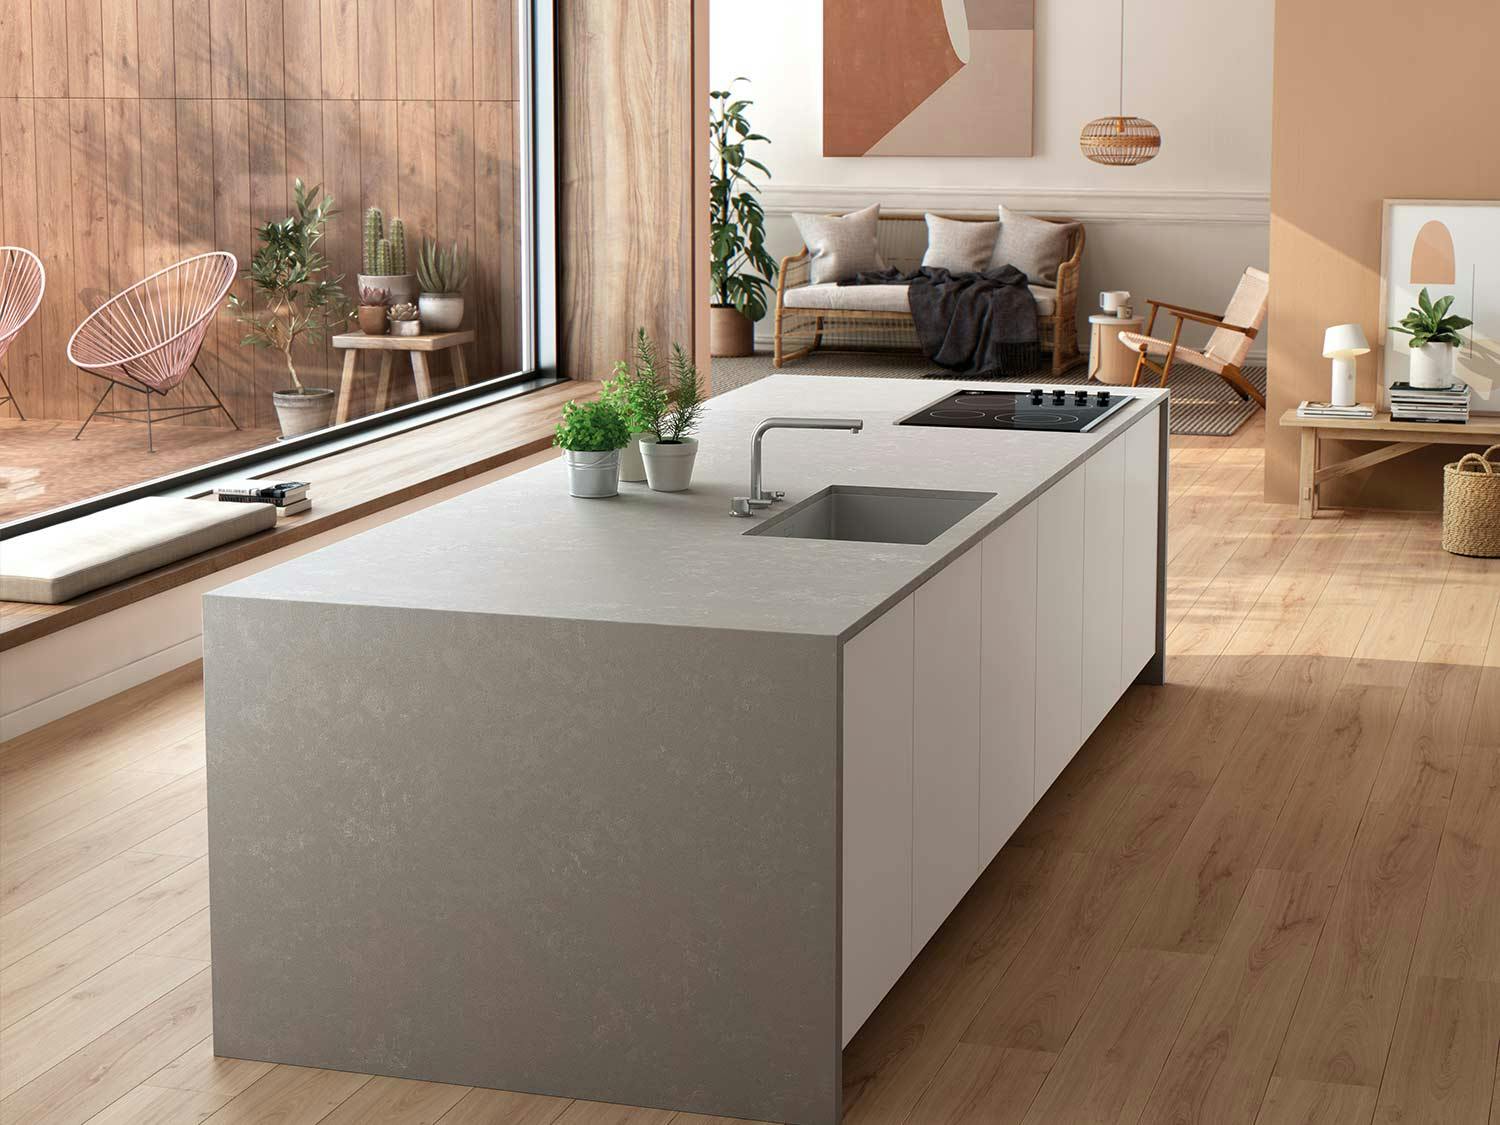 HybriQ+ Technology and Silestone® Loft: More natural, more sustainable, more design possibilities